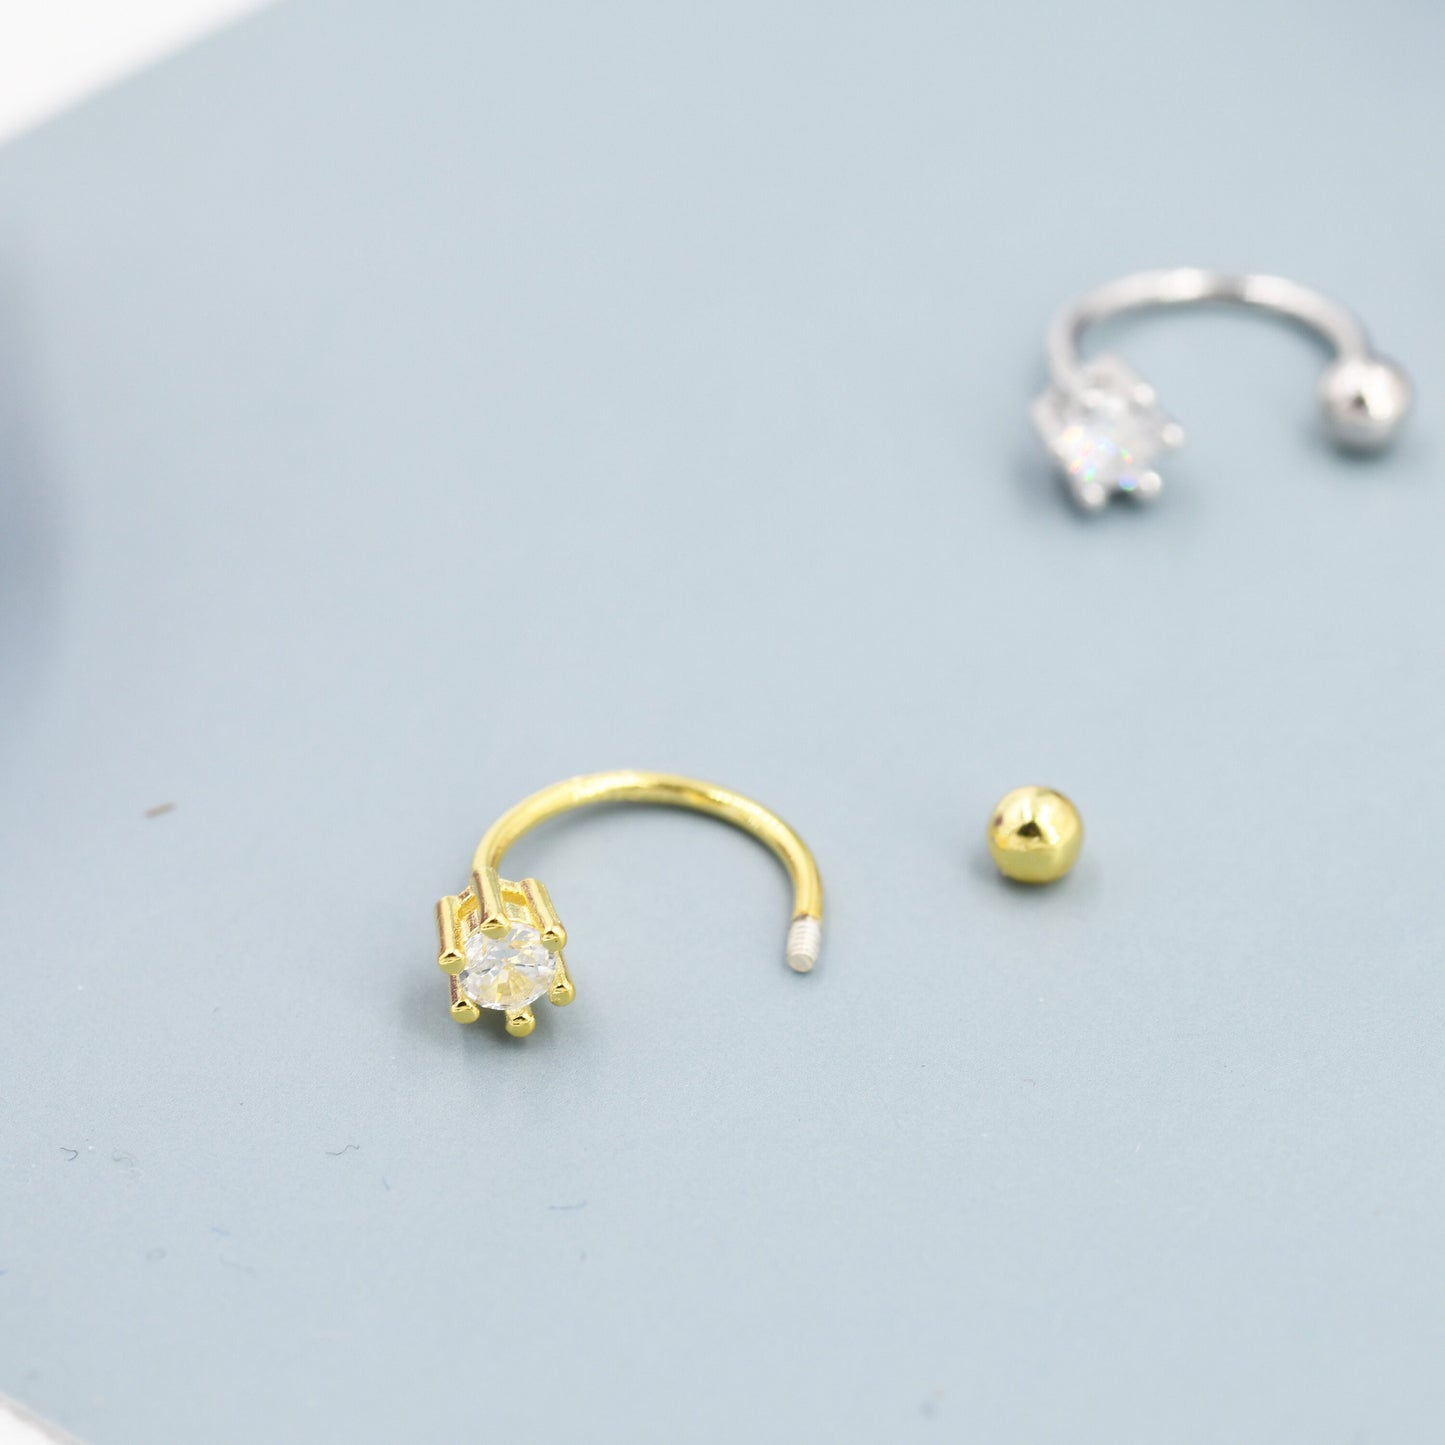 Huggie Hoop Earrings (2pc) with Screw Back in Sterling Silver, Sparkly CZ Crystals (Lab Diamond), Curved Barbell Earrings